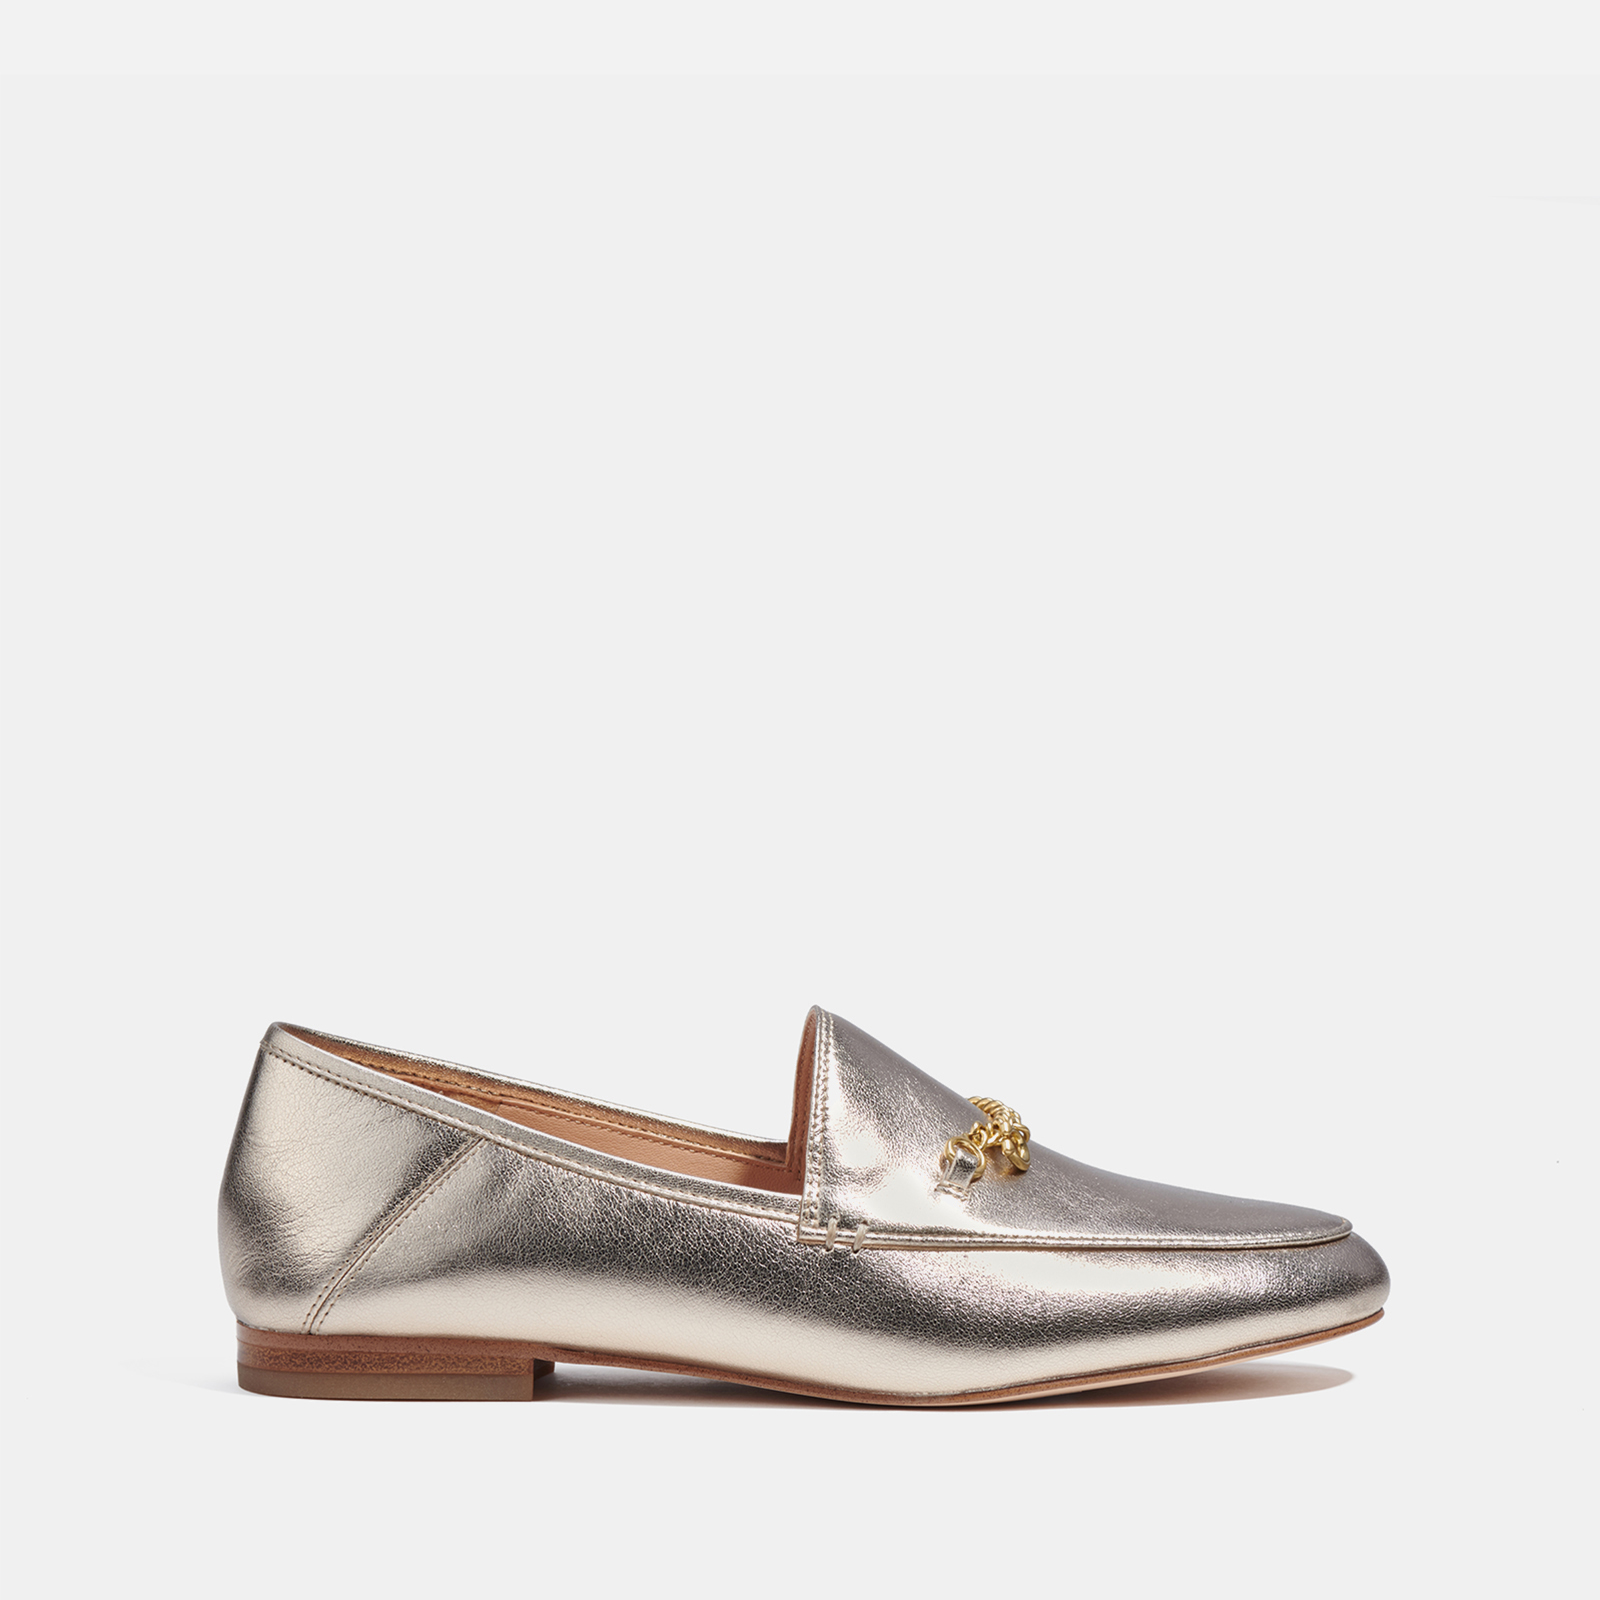 Coach Hanna Metallic Leather Loafers | Coggles